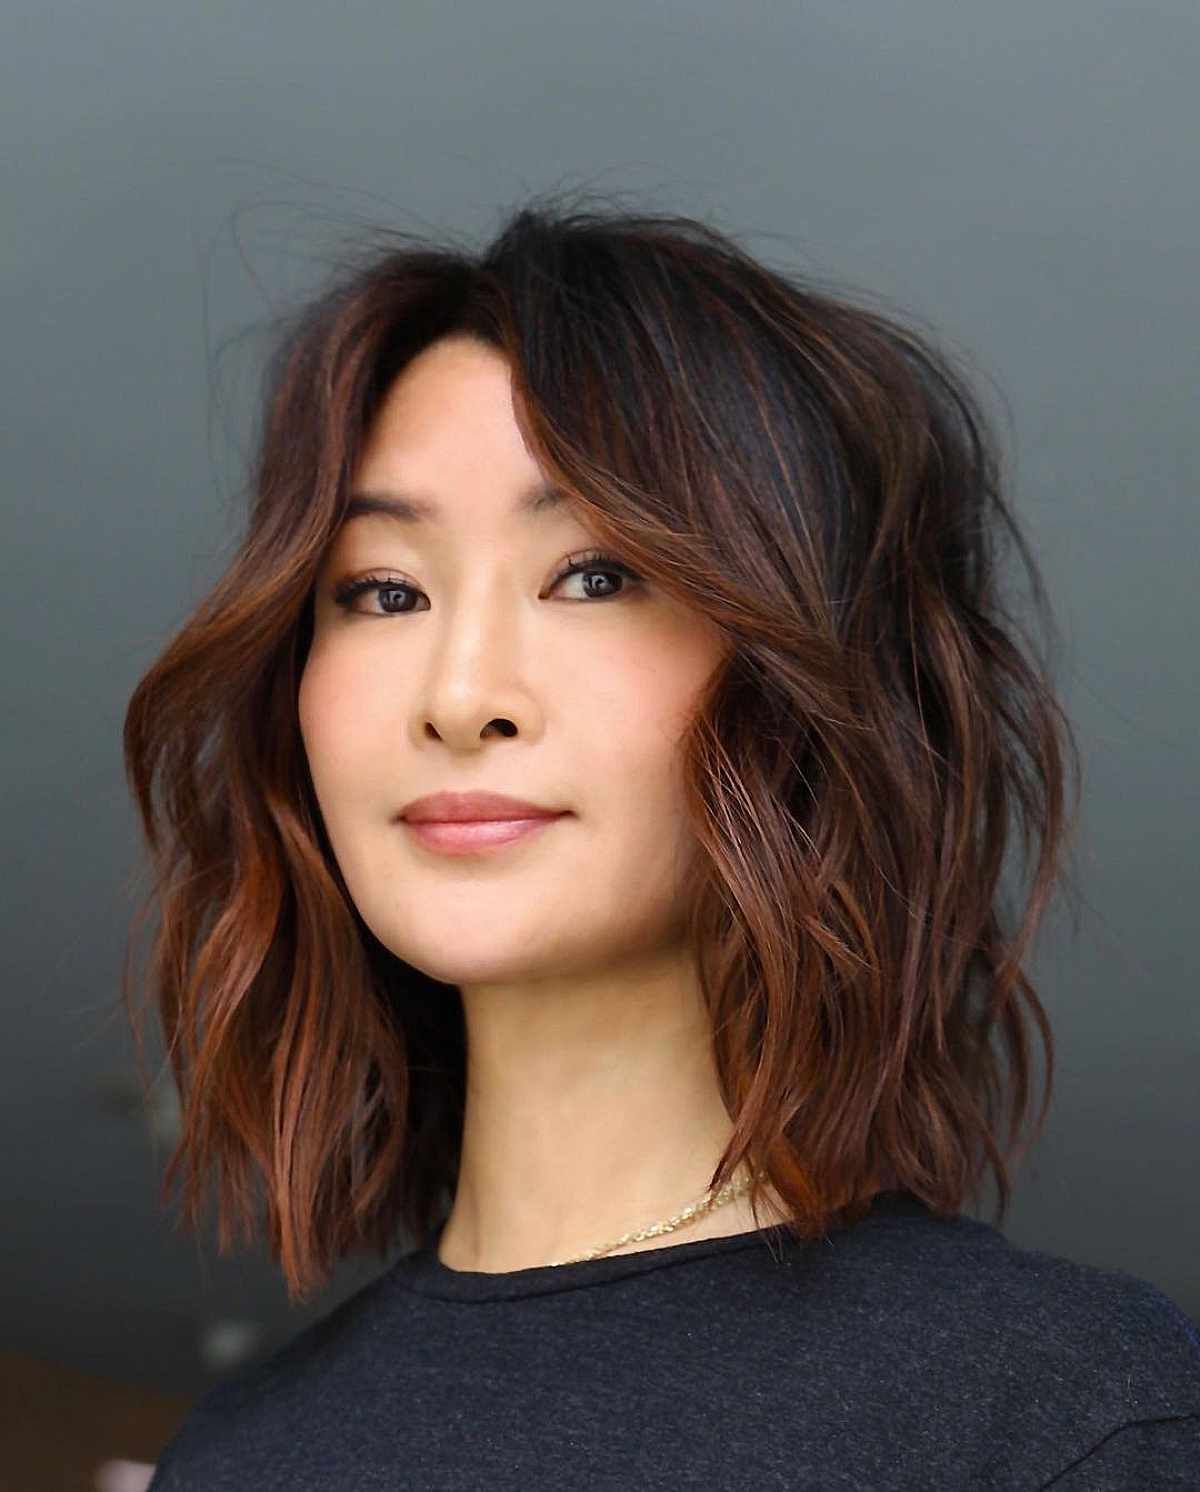 50+ Ideal Haircuts For Women With Thick Hair Throughout Textured Cut For Thick Hair (Photo 13 of 14)